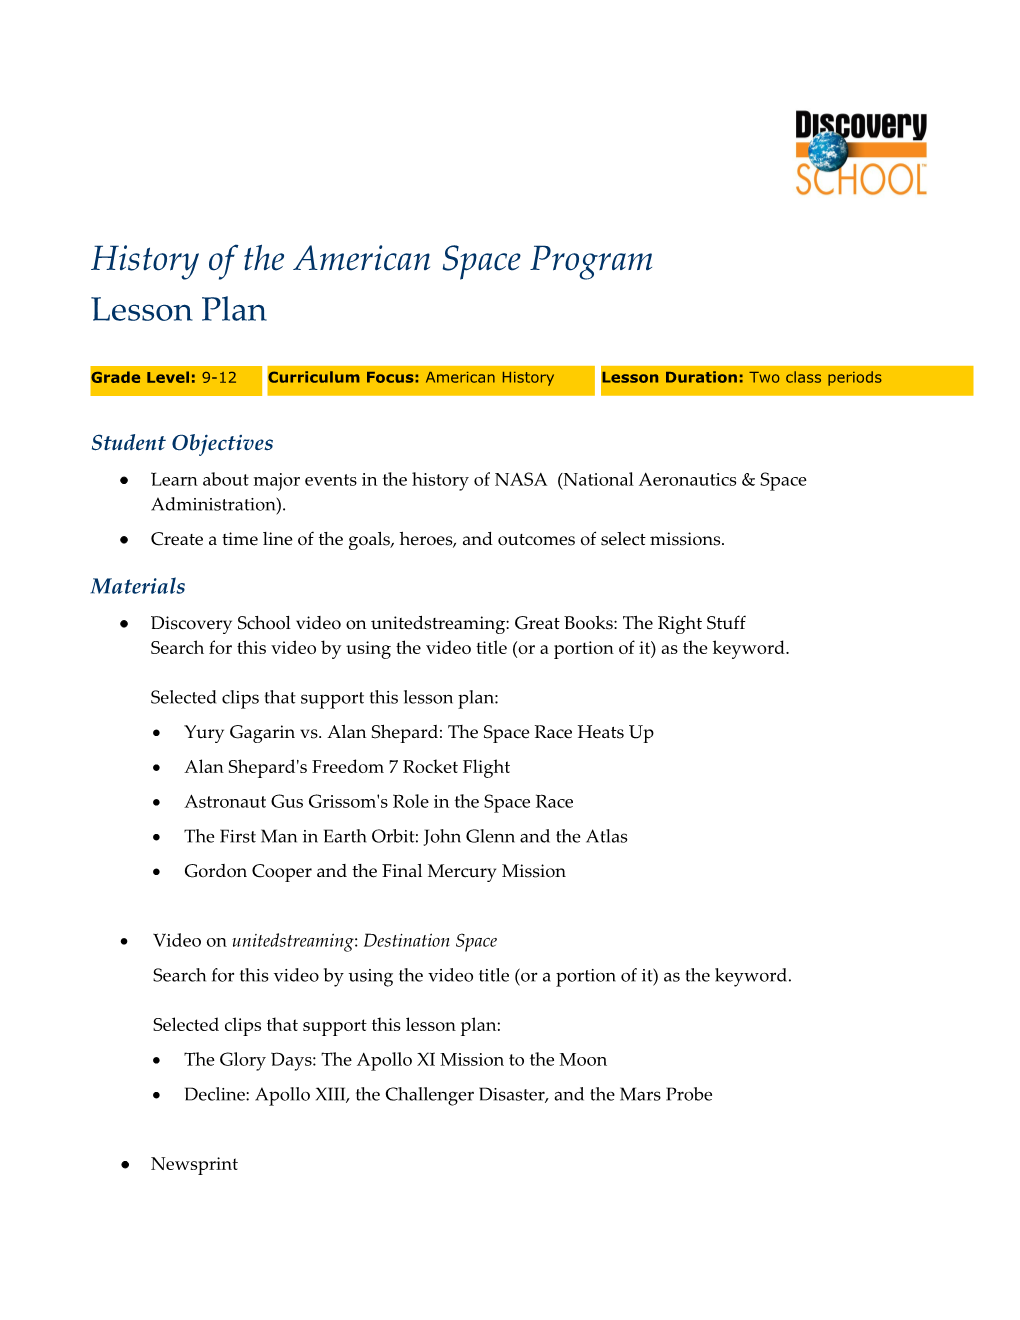 History of the American Space Program 1